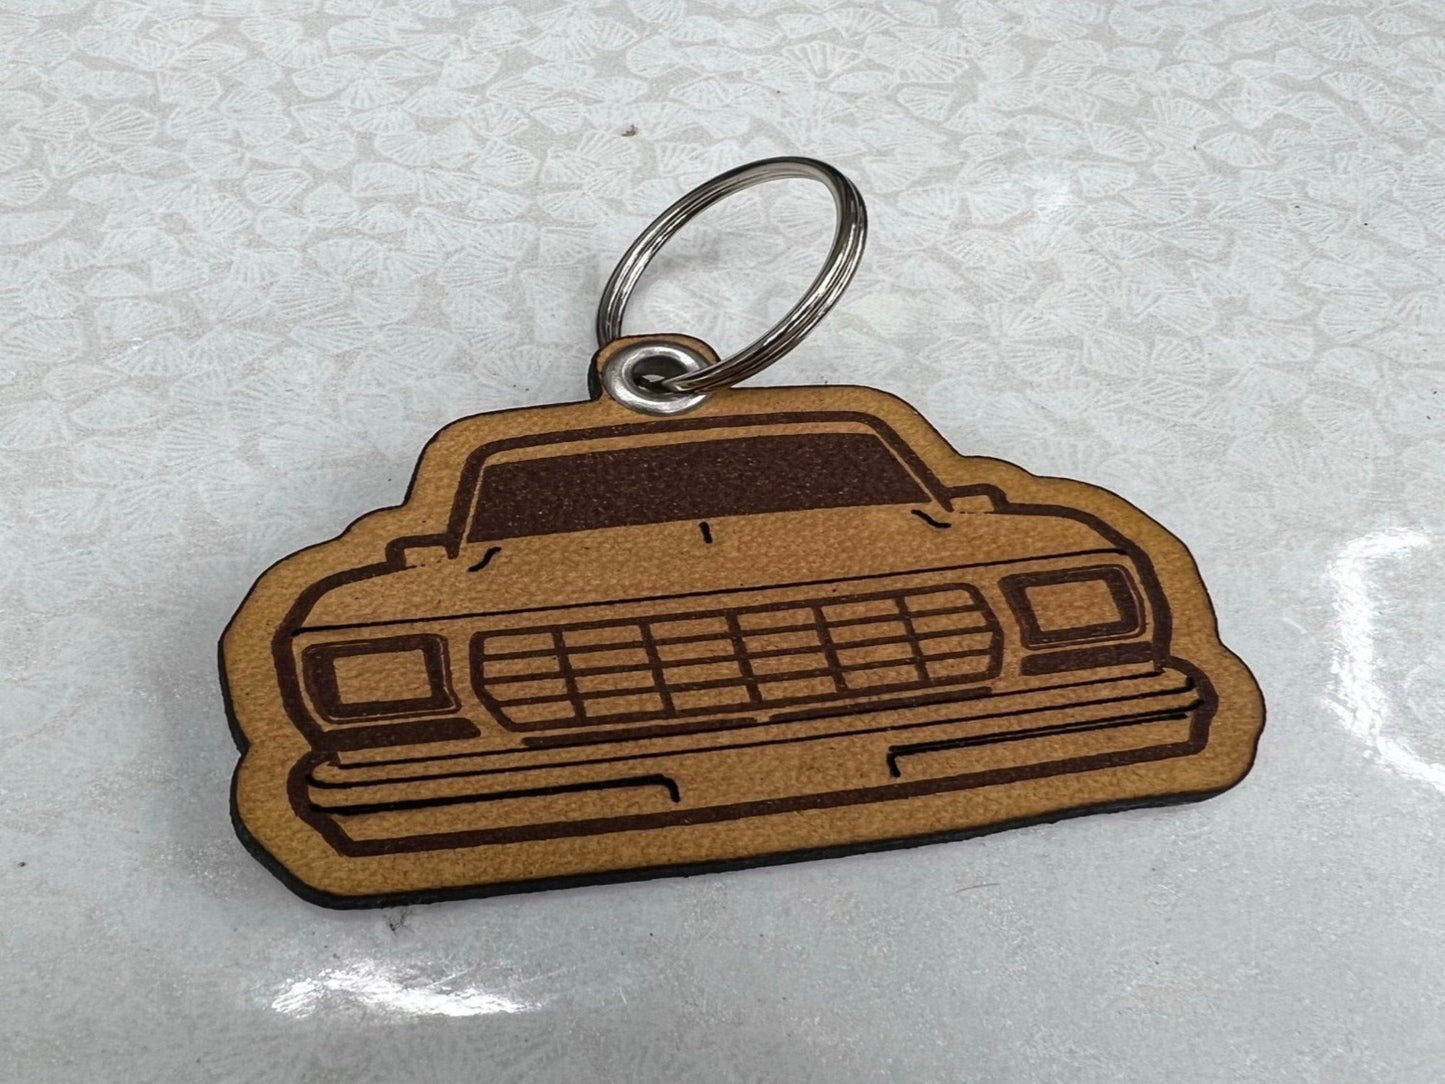 1978-1979 Ford F150 Engraved Leather Keychain - Stylish and Durable Accessory for Classic Car Enthusiasts and a Perfect Gift Idea